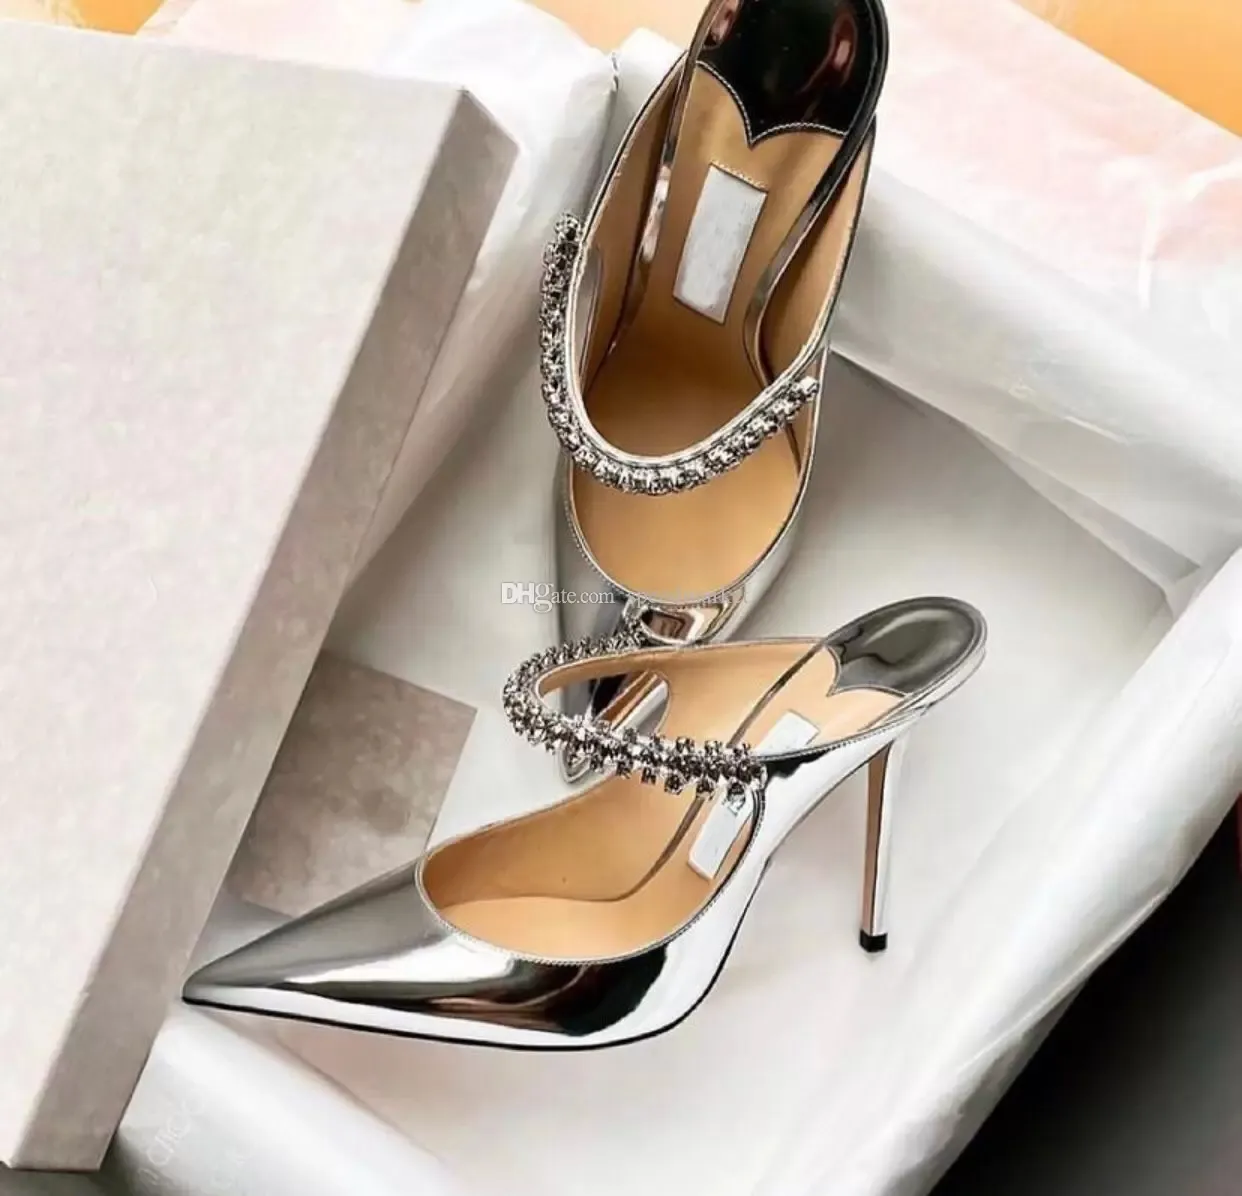 Summer Women's Sandals Bing Crystal Straps Dress Shoes Elegant High Heels Sexy Pointed Toe Slippers Lady Bridal Wedding Party Luxury Pumps Nude Black EU34-43